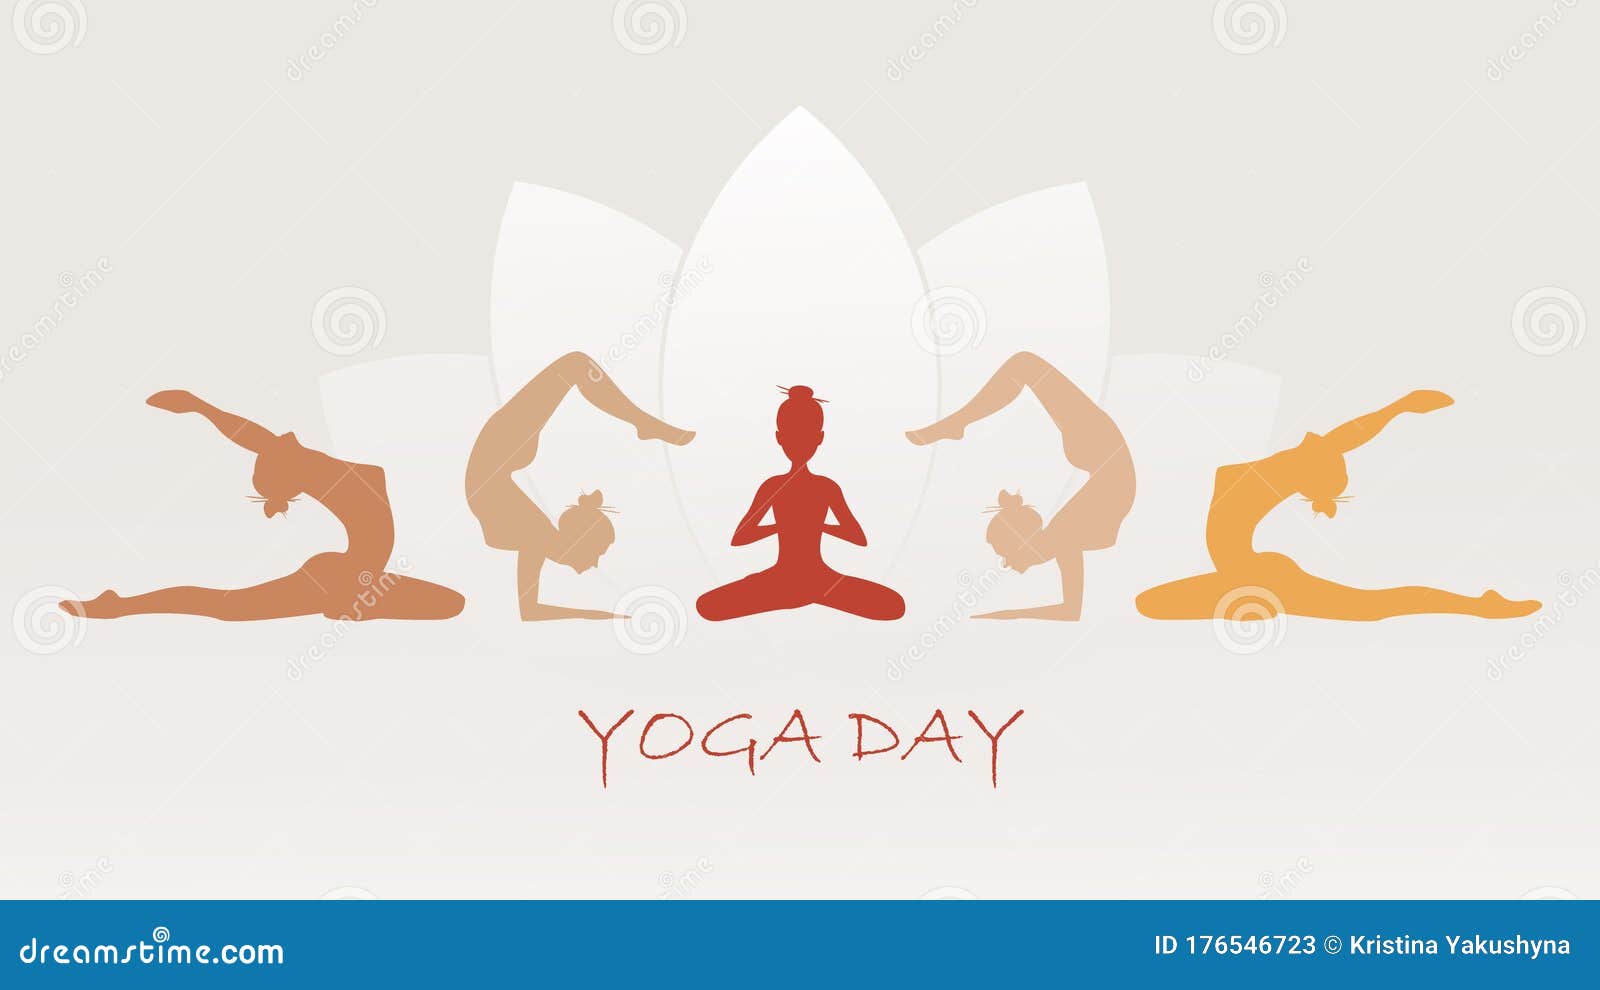 5 Different Yoga Pose Flat Illustration, Creative Poster Or Banner ...